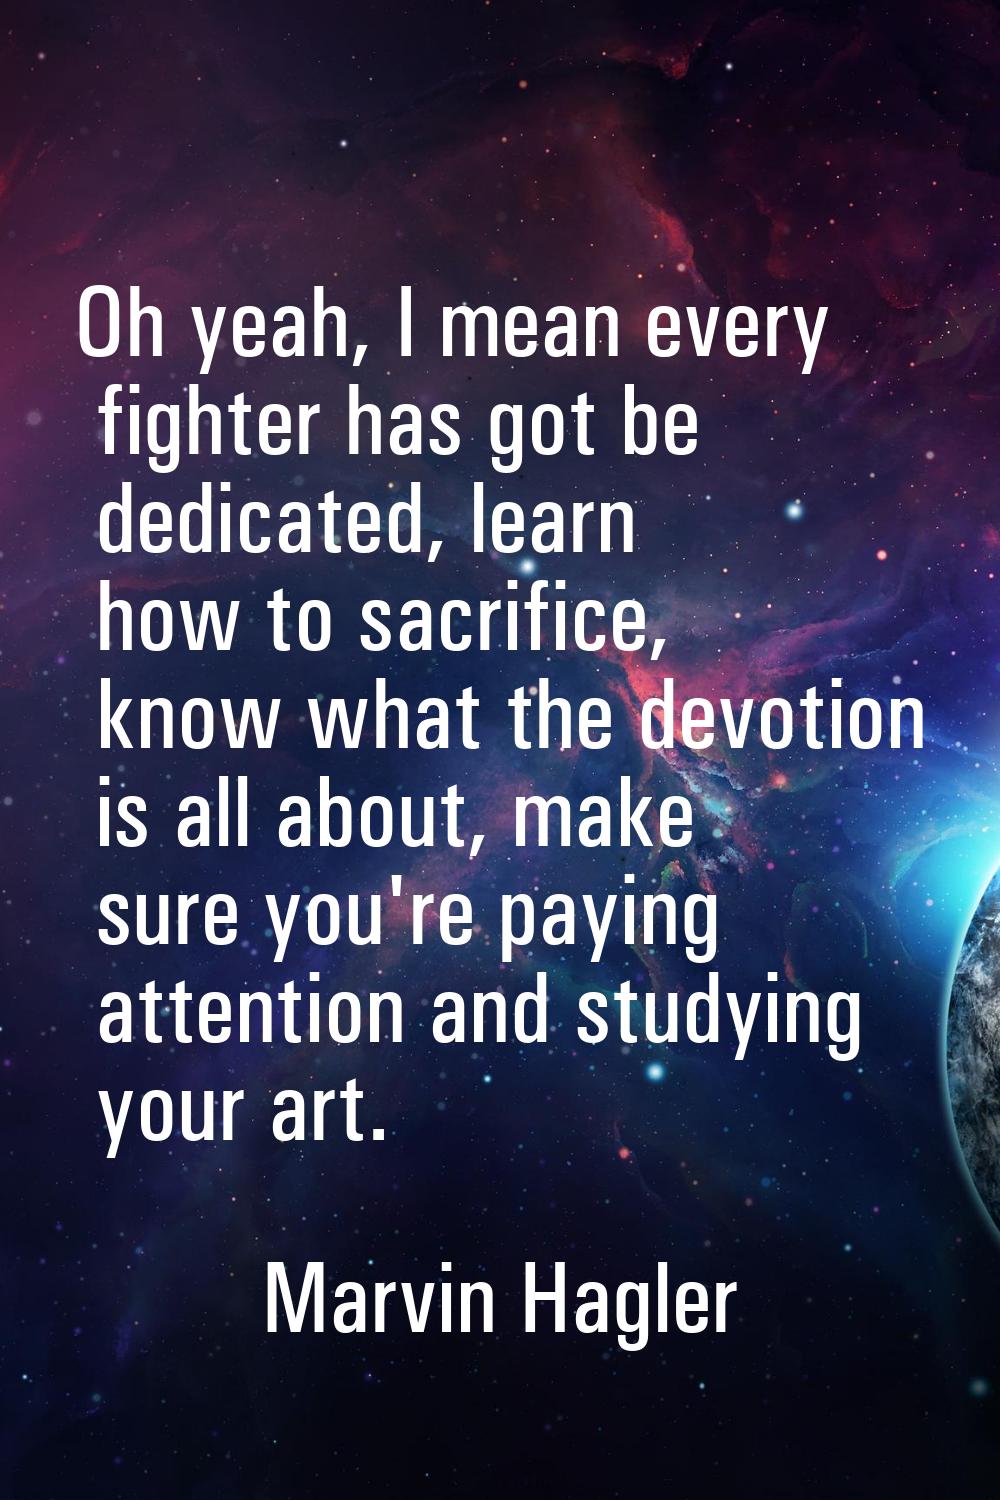 Oh yeah, I mean every fighter has got be dedicated, learn how to sacrifice, know what the devotion 